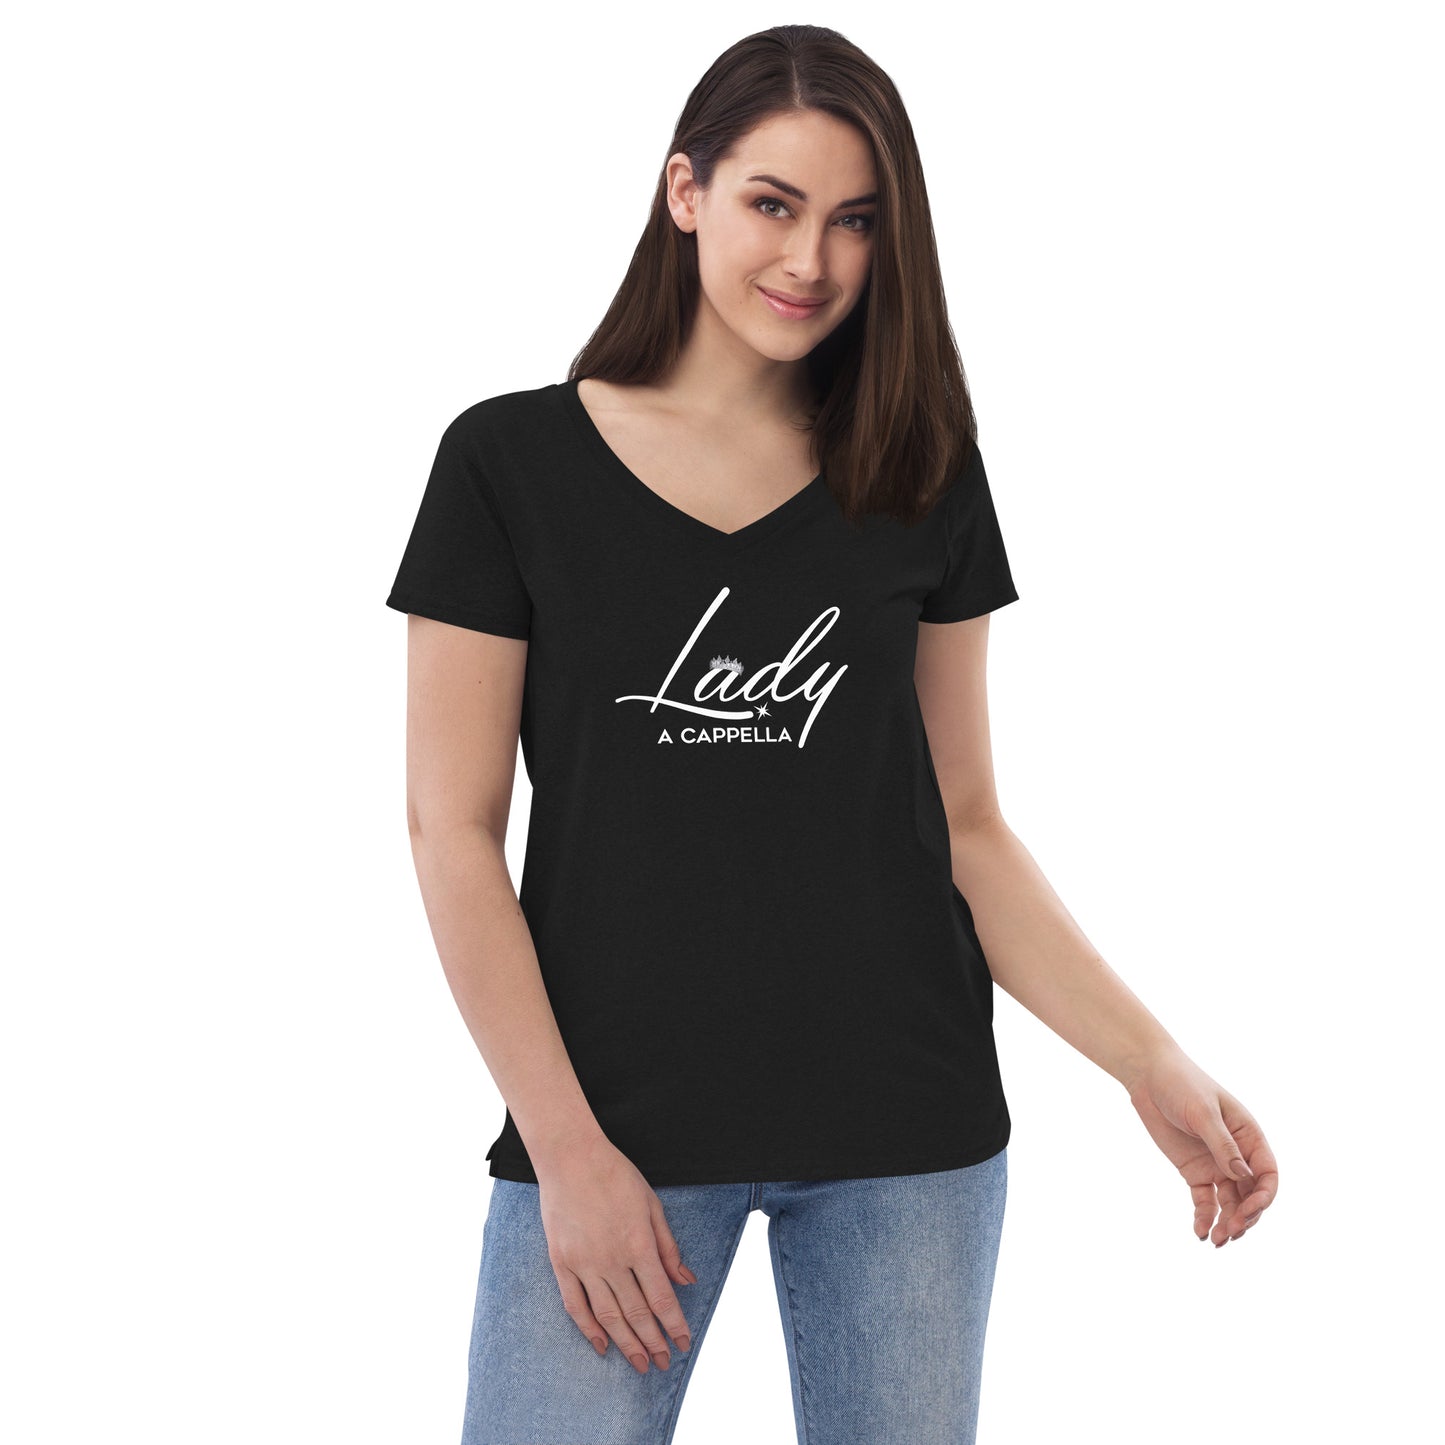 Lady A Cappella - Women’s recycled v-neck t-shirt